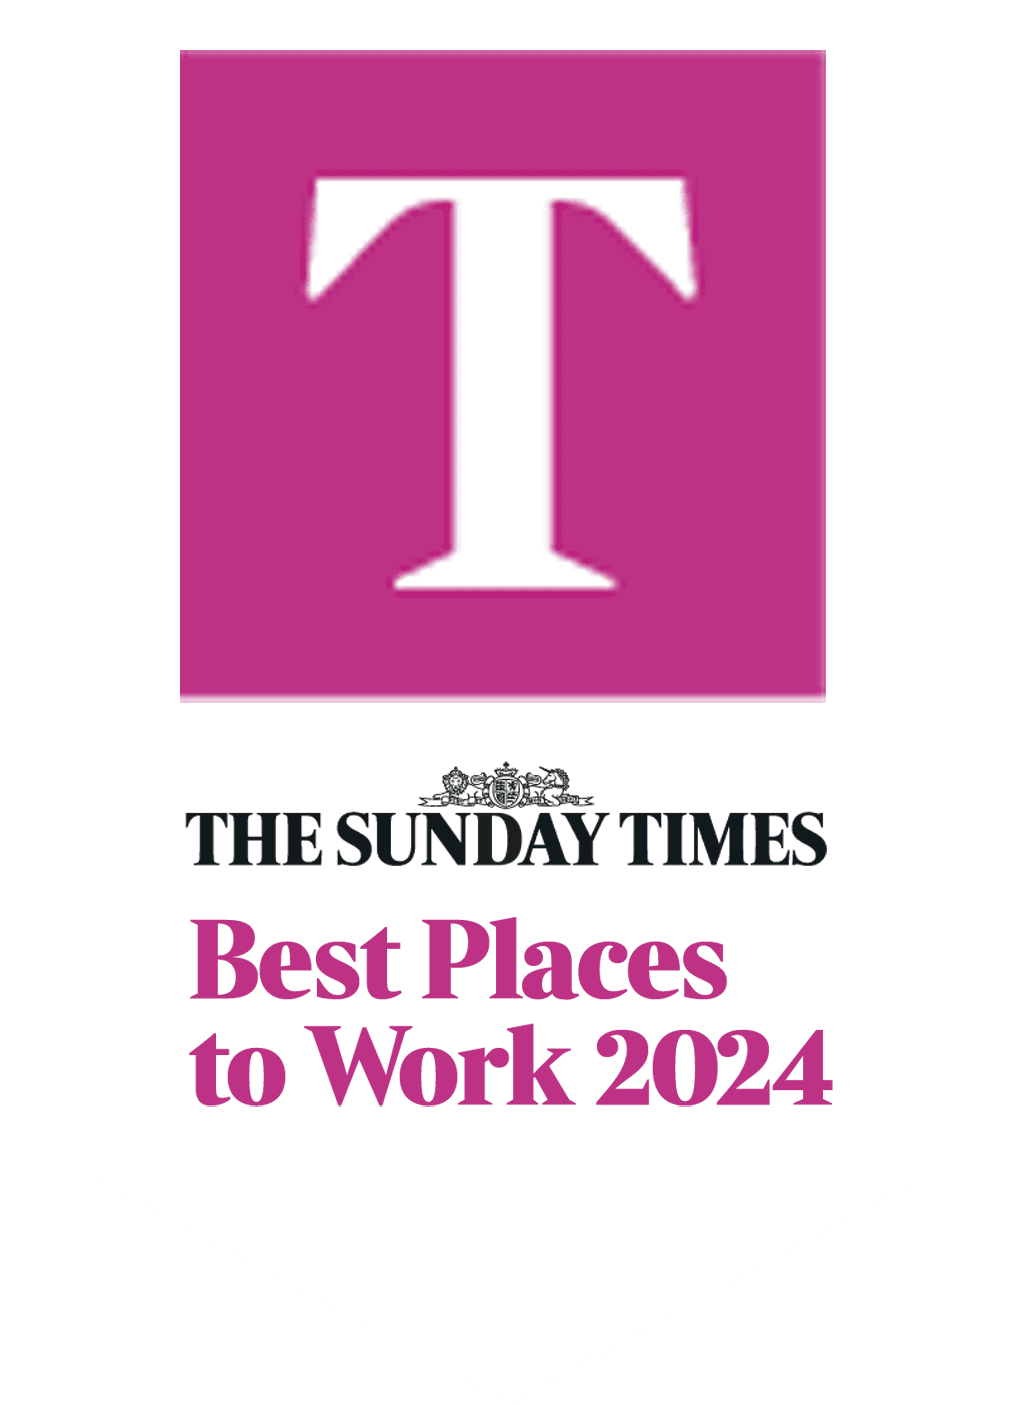 Sunday Times Best Places To Work Logo (1)